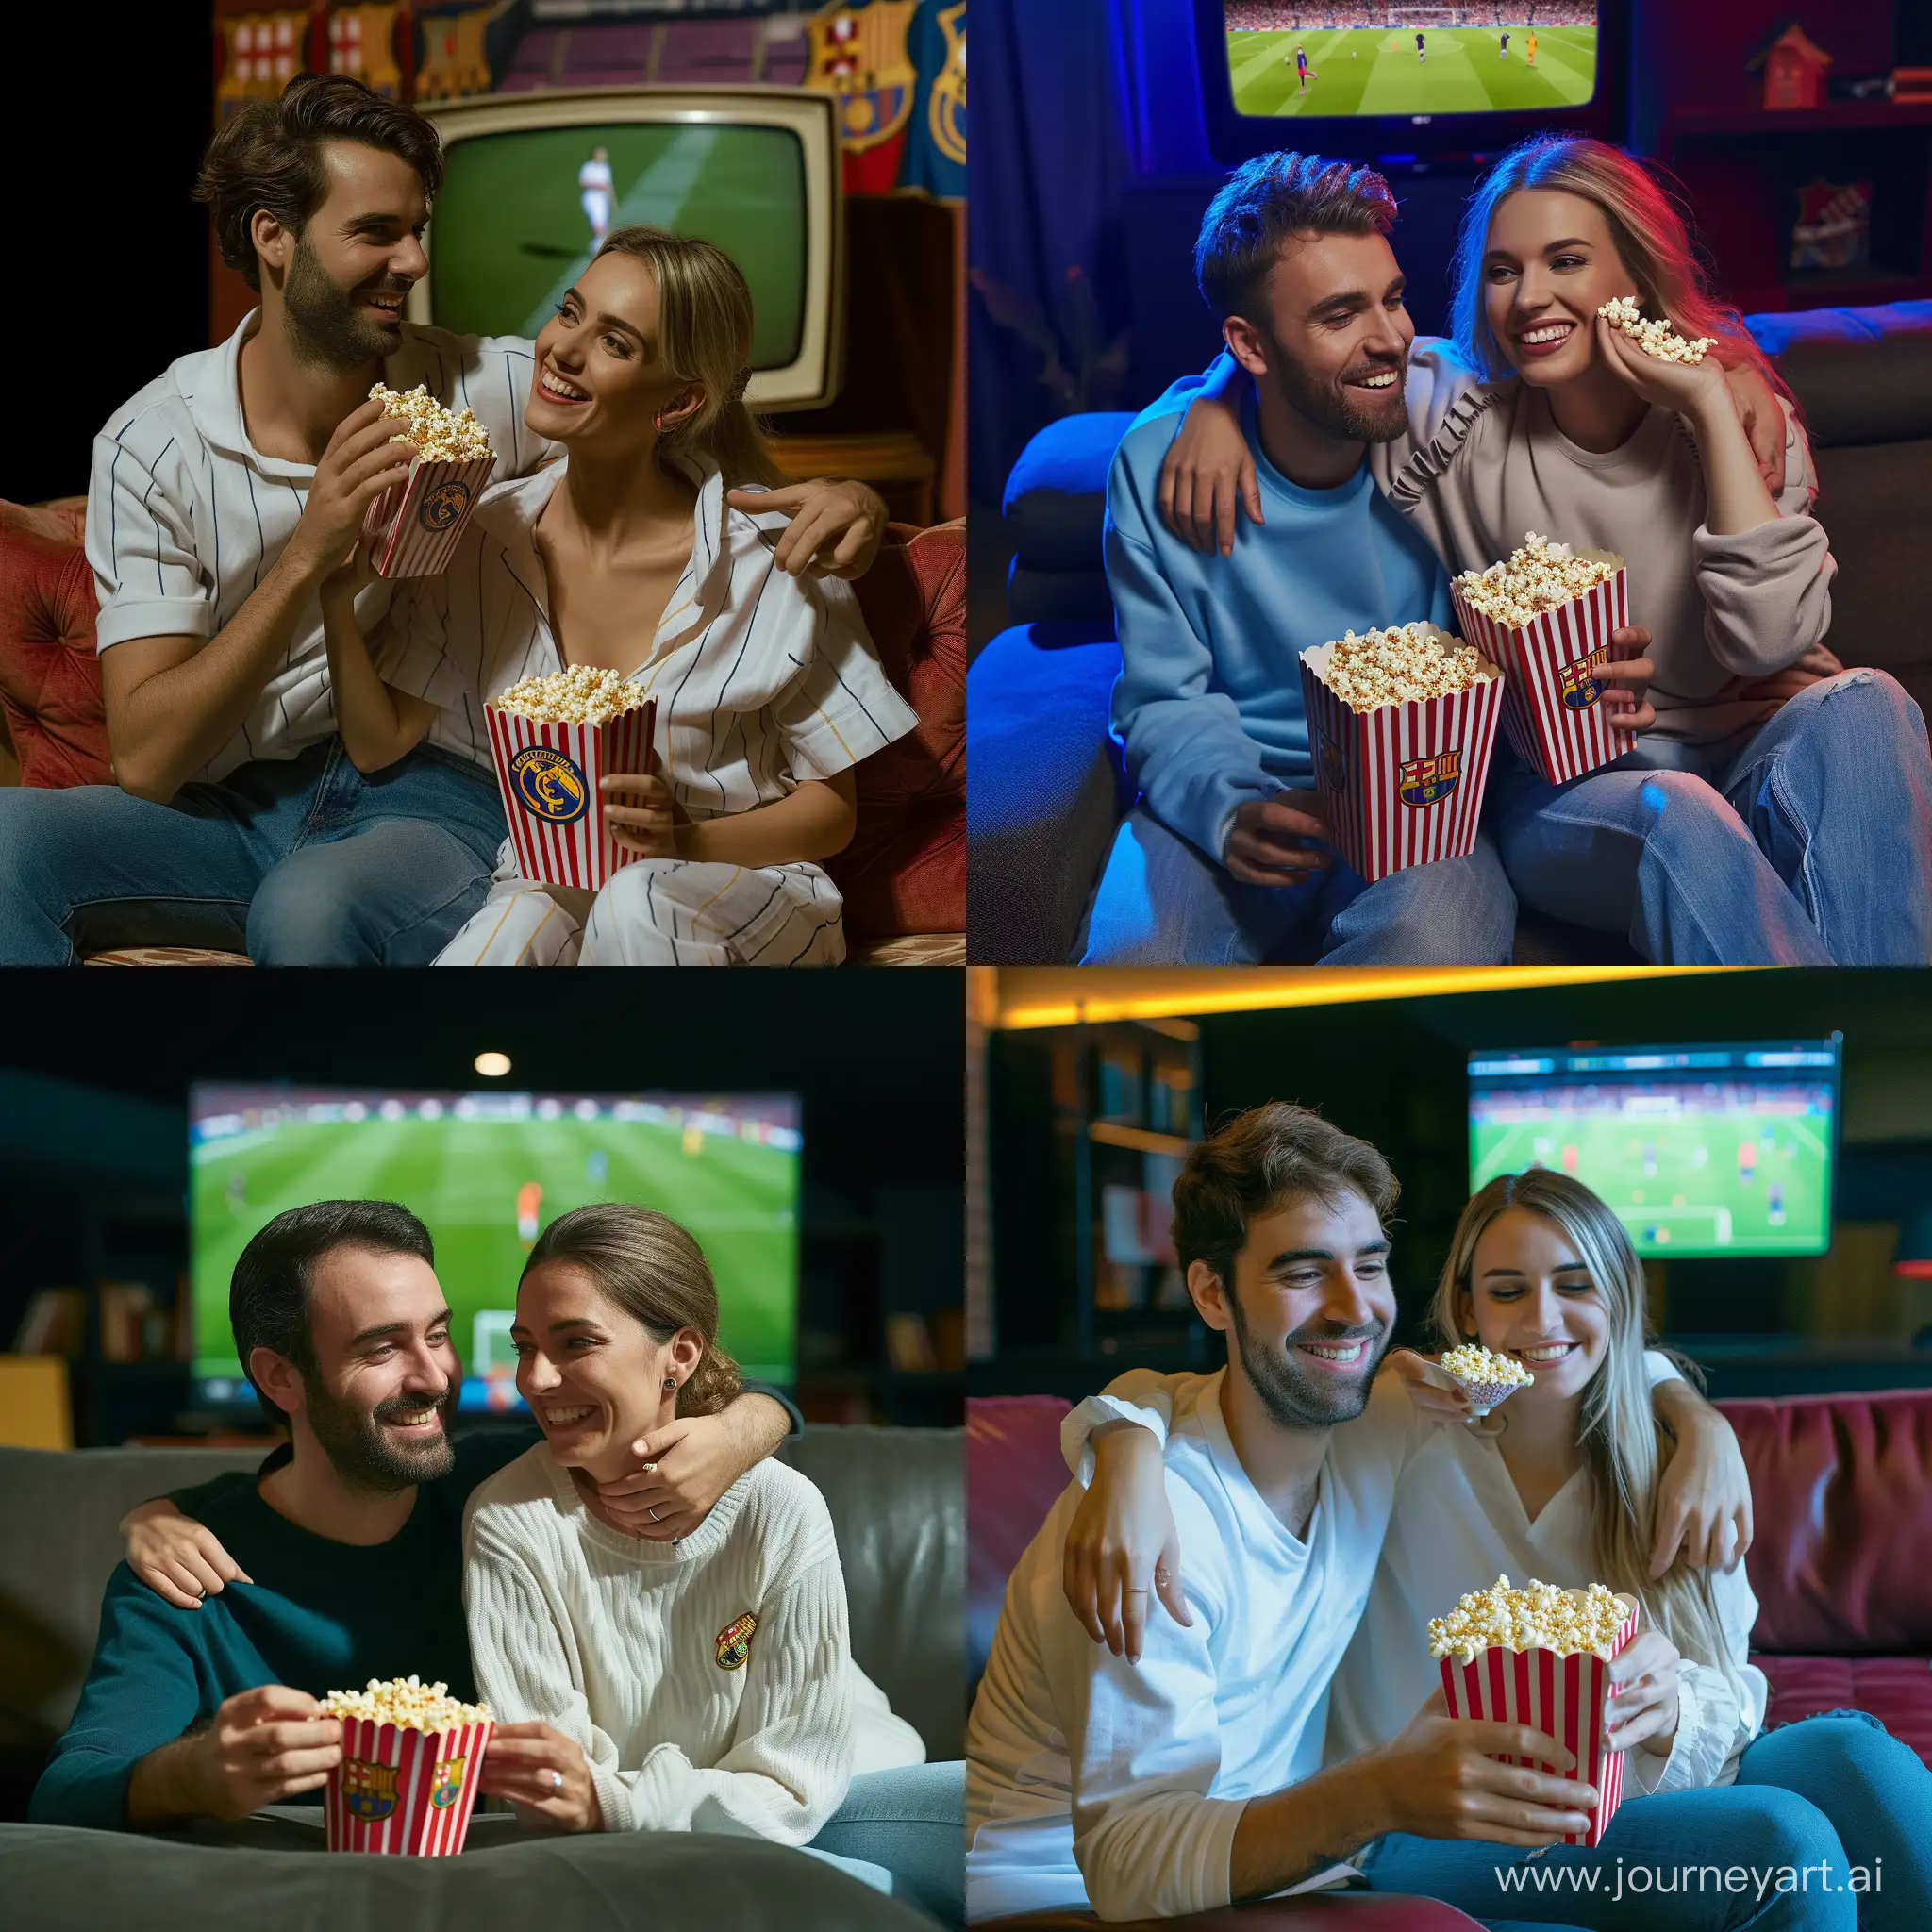 Cozy-Couple-Watching-Barcelona-vs-Real-Madrid-Football-Match-with-Popcorn